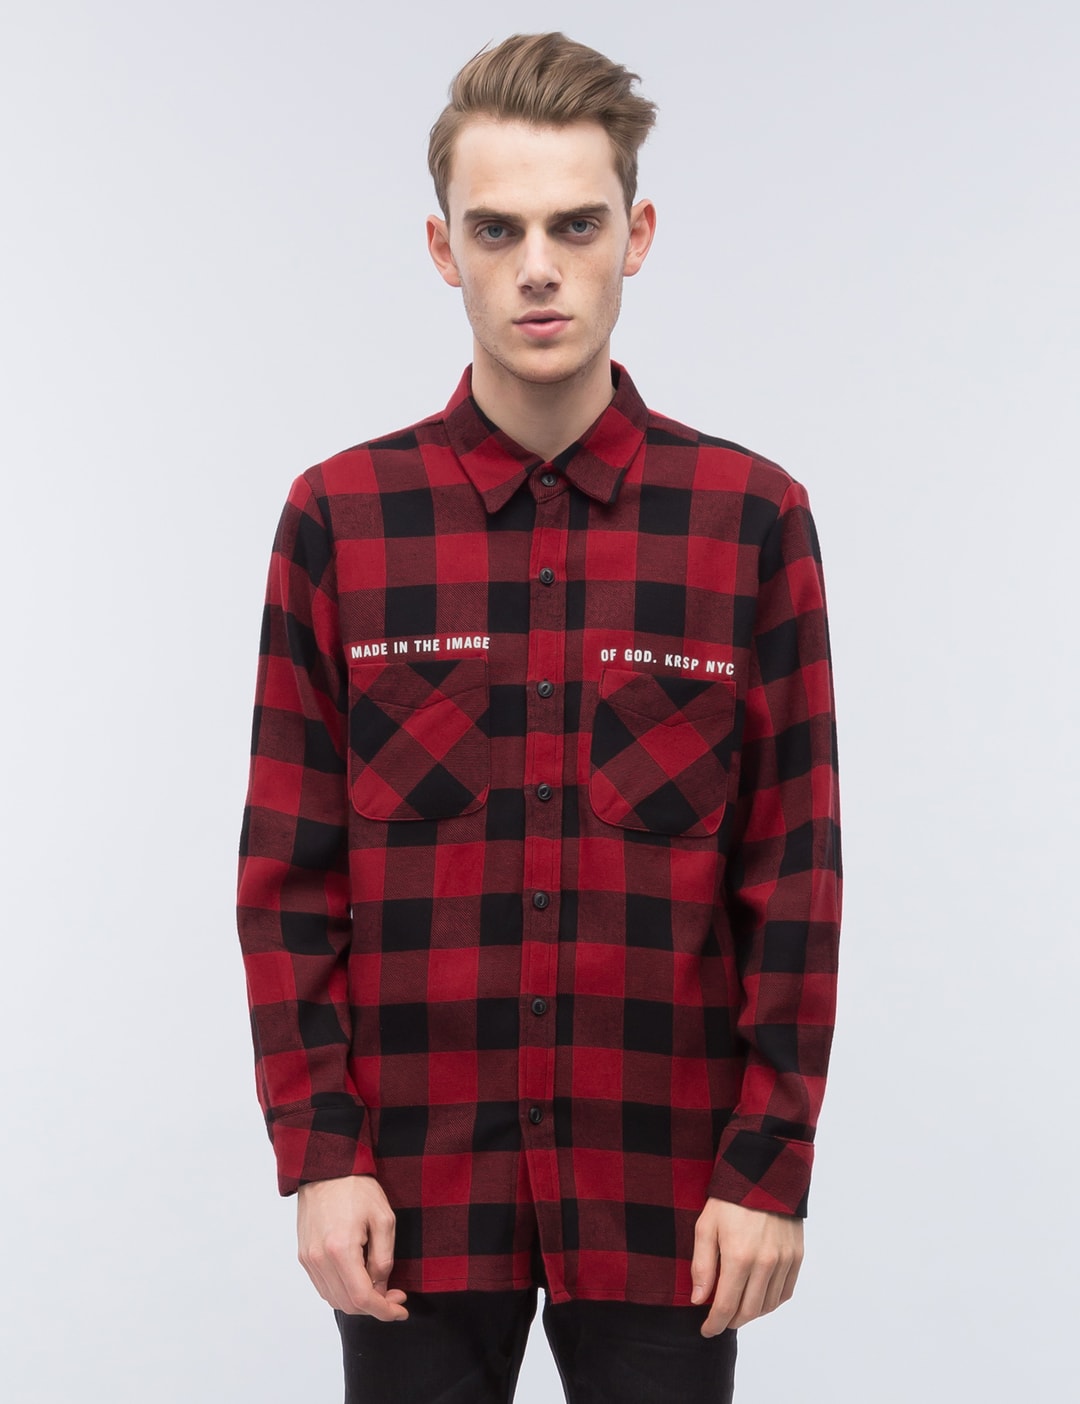 Krsp - KRSP Flannel Shirt | HBX - Globally Curated Fashion and ...